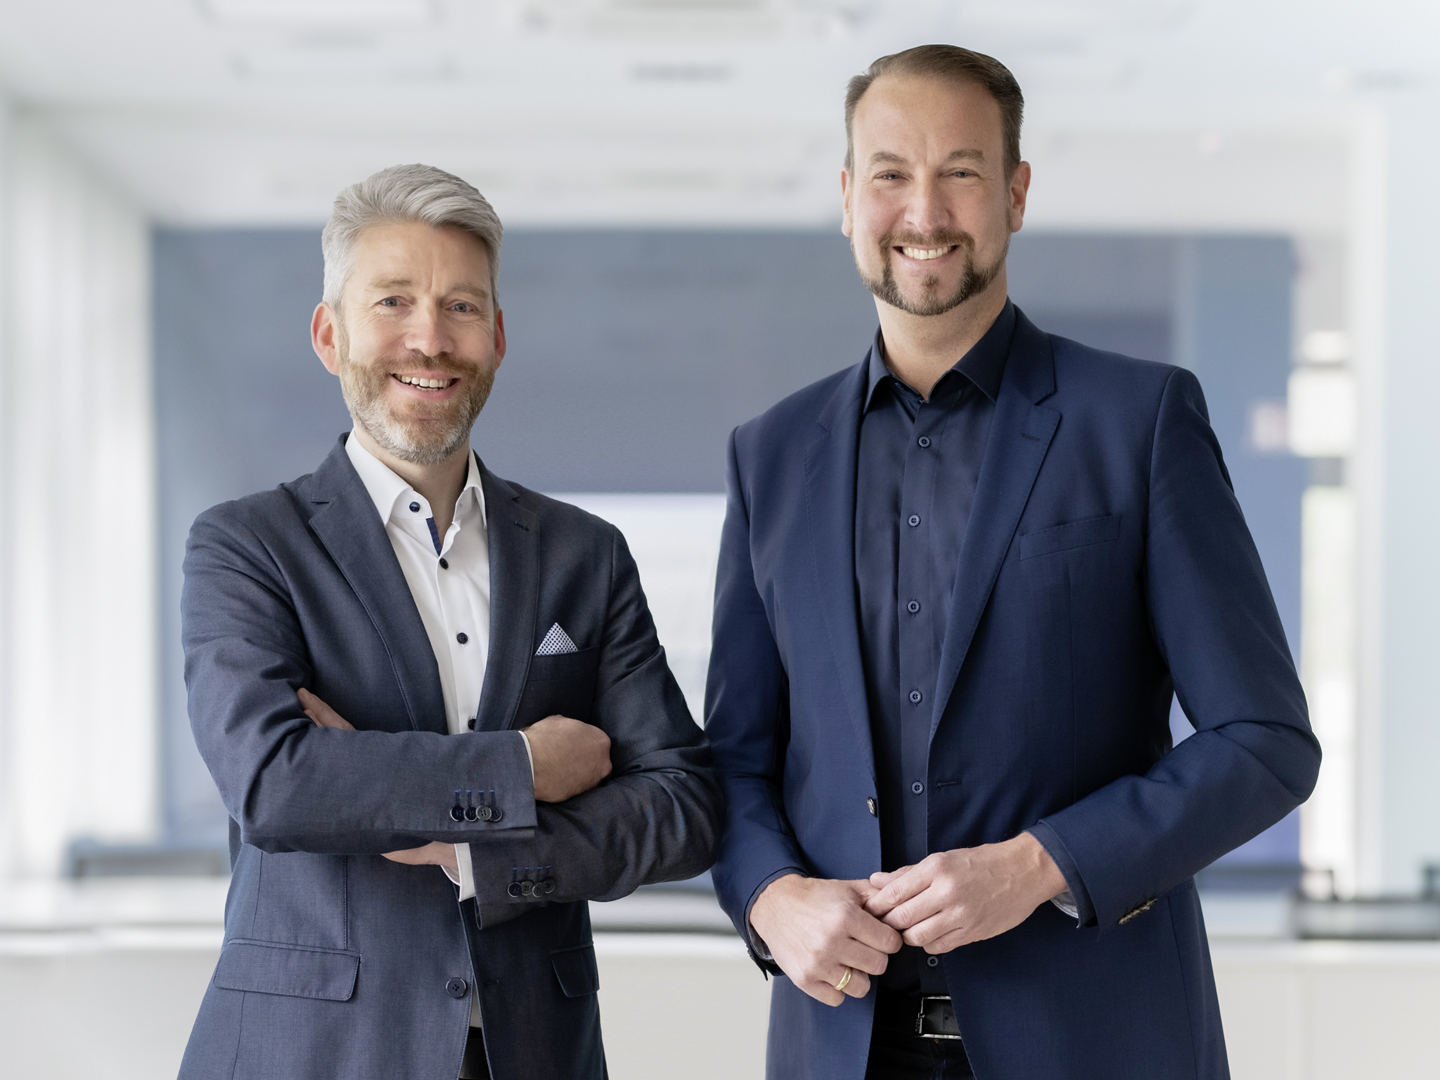 n August 2022, Prof. Christian Doetsch and Prof. Manfred Renner are taking joint charge of the Fraunhofer Institute for Environmental, Safety and Energy Technology UMSICHT.